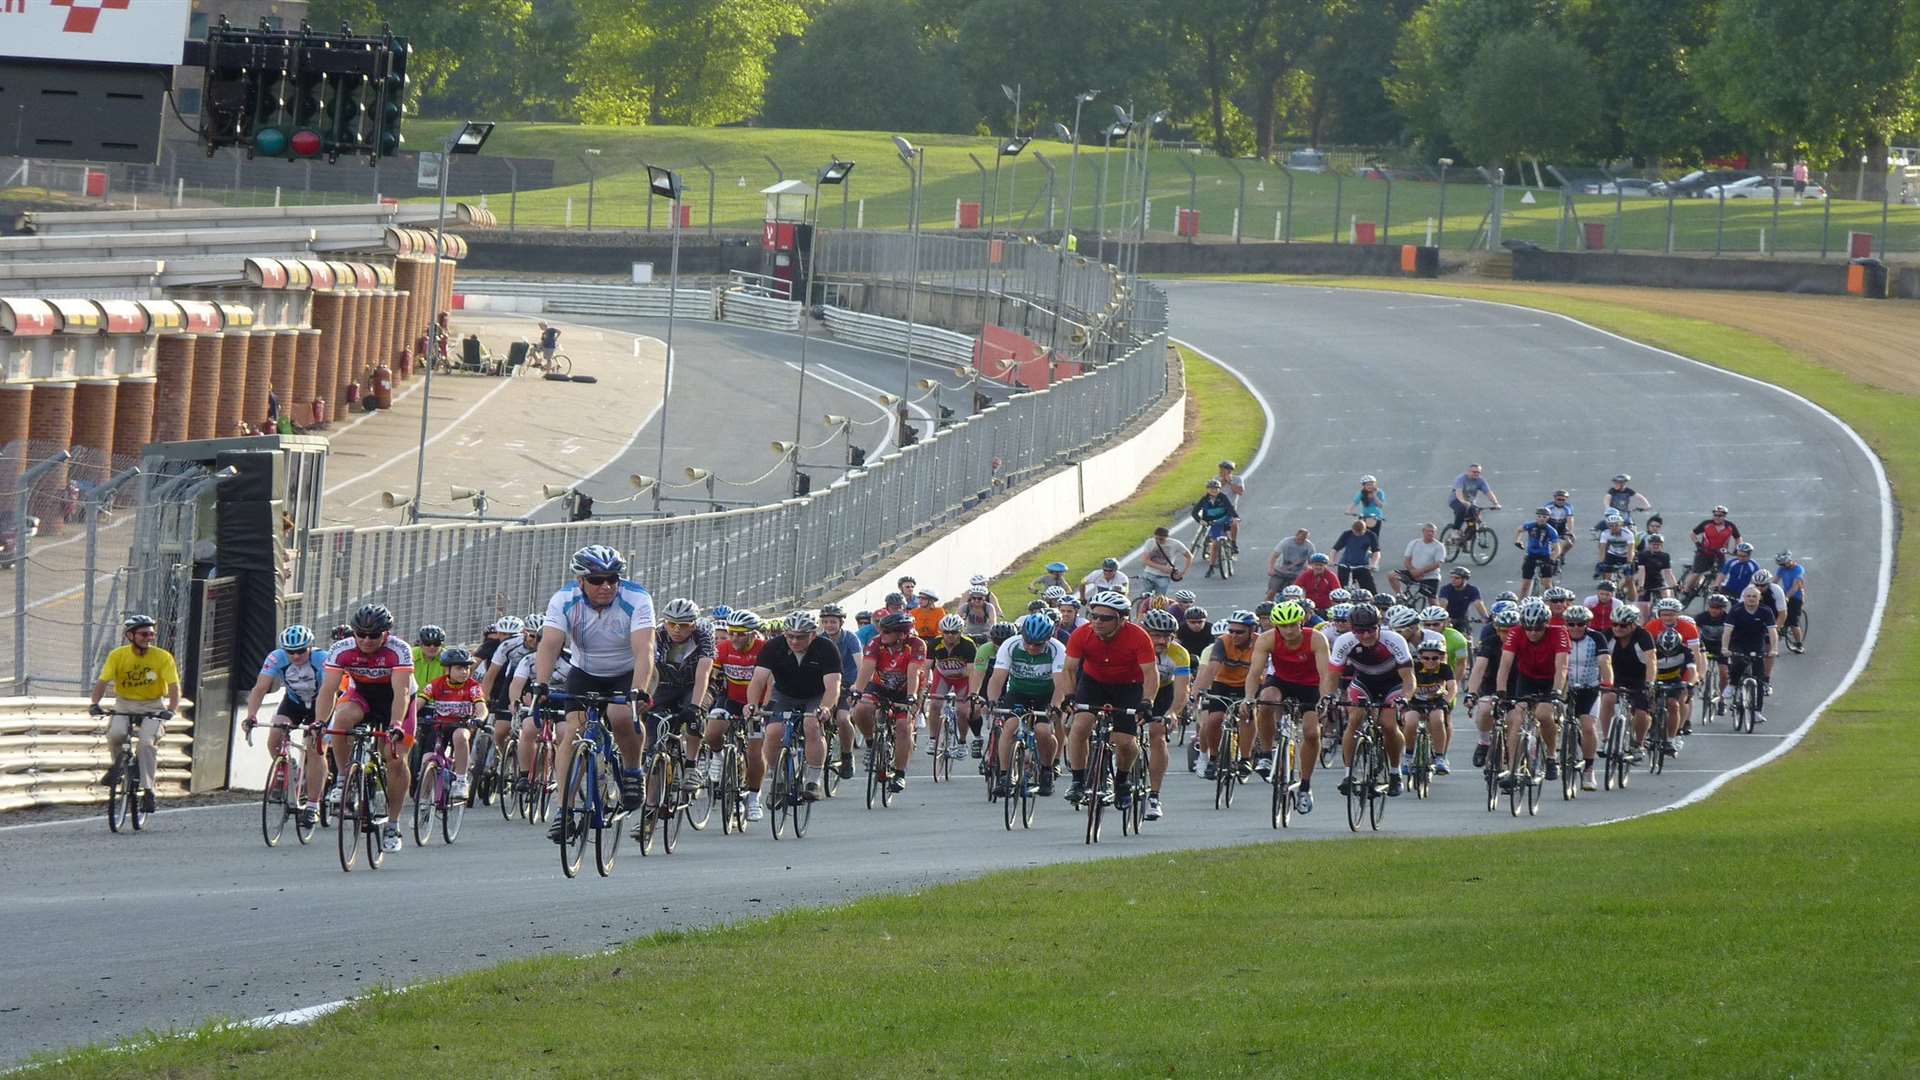 Cyclists of all ages can take part in the annual Bike Around Brands Hatch fundraiser